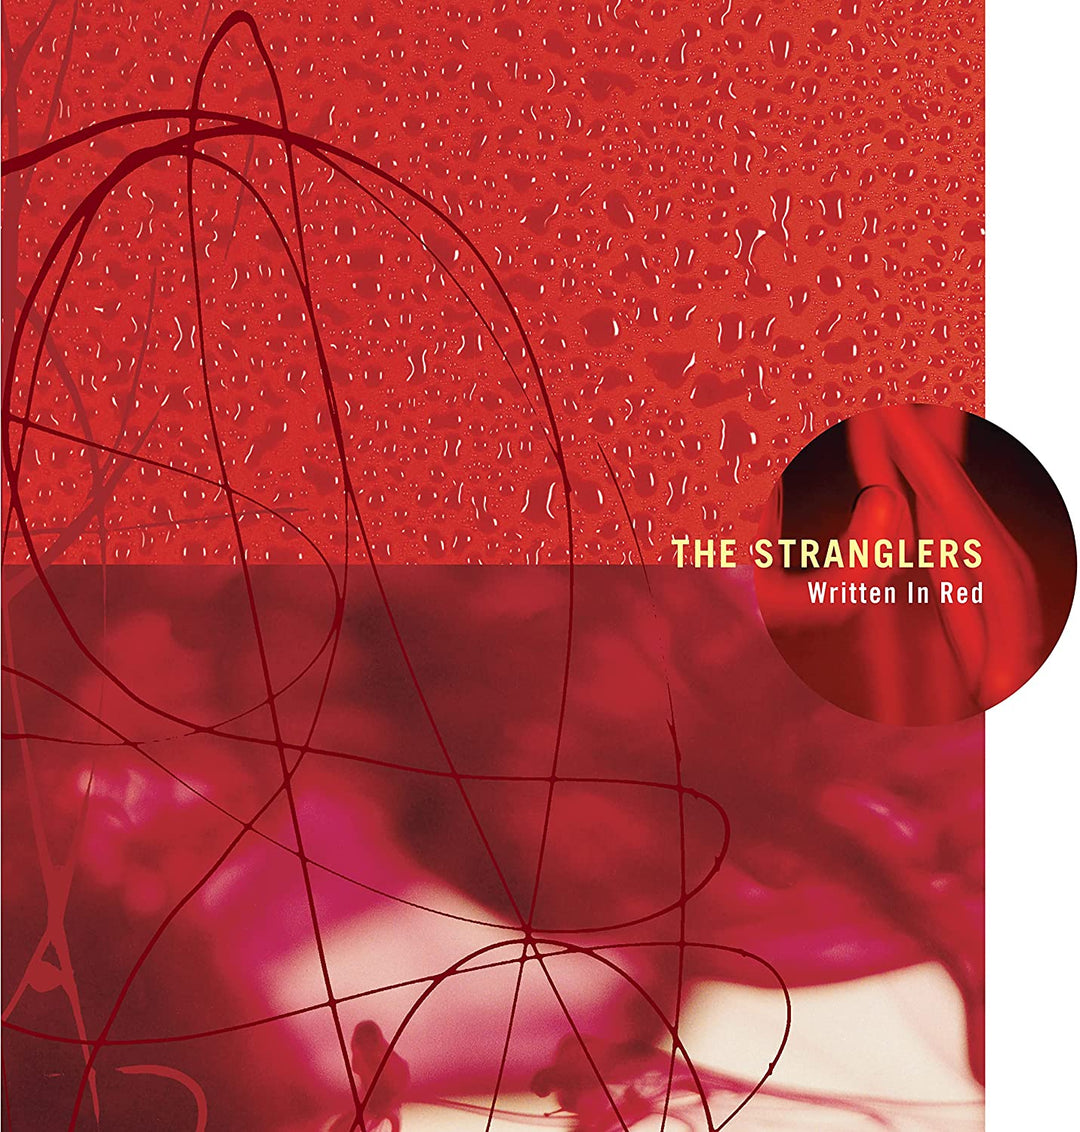 The Stranglers - Written In Red [Audio CD]